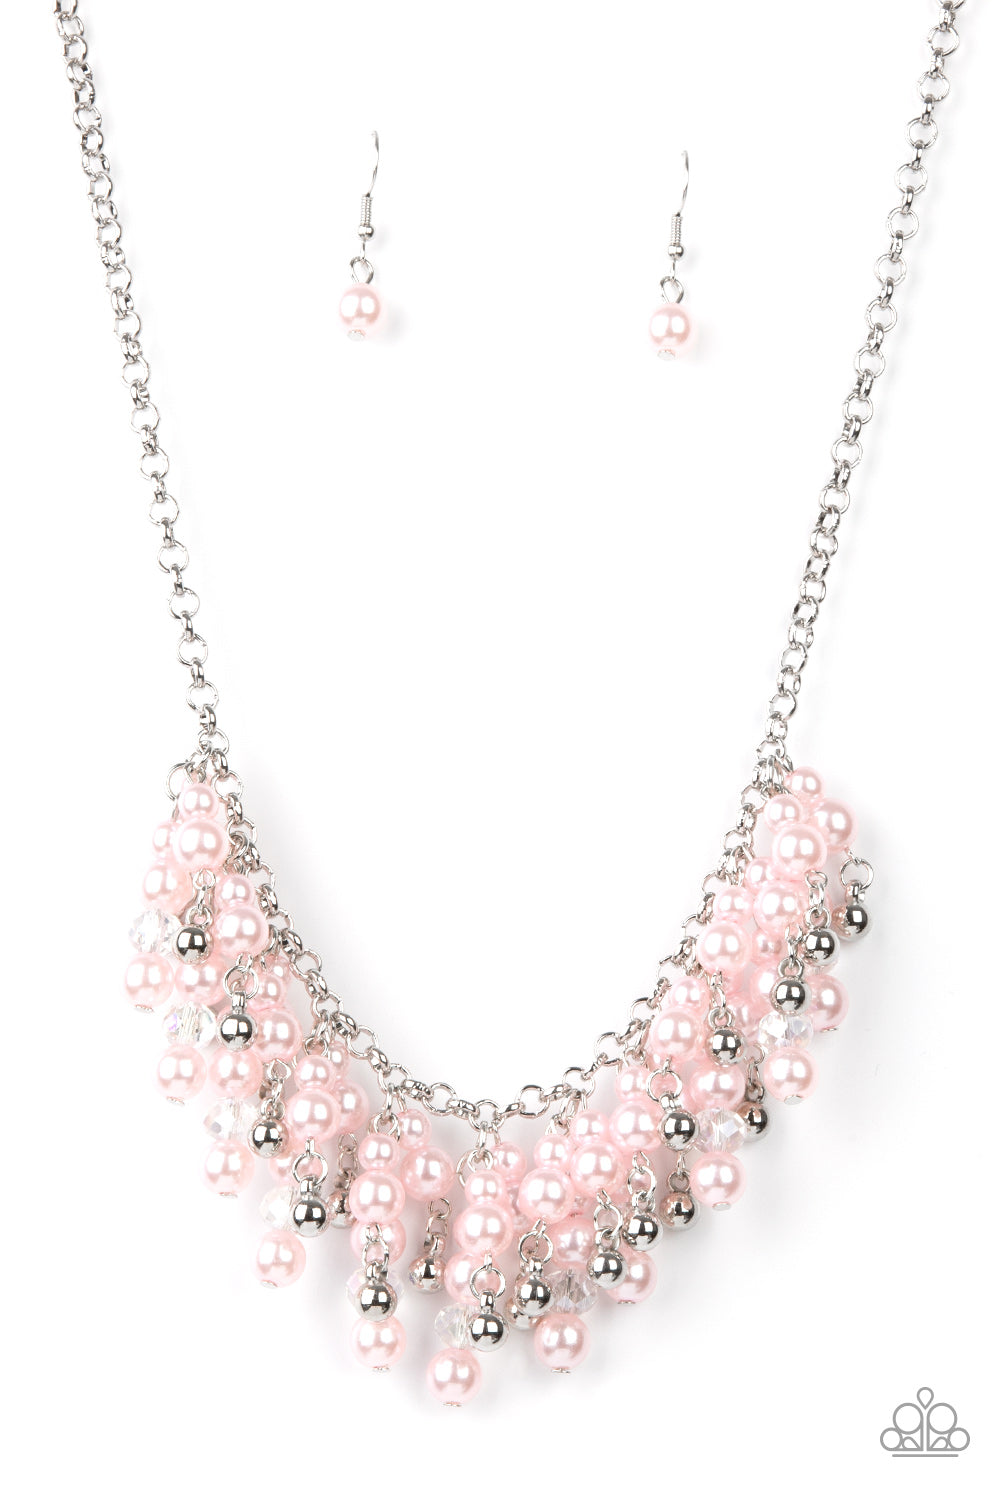 Champagne Dreams - Pink ***COMING SOON*** - Bling With Crystal